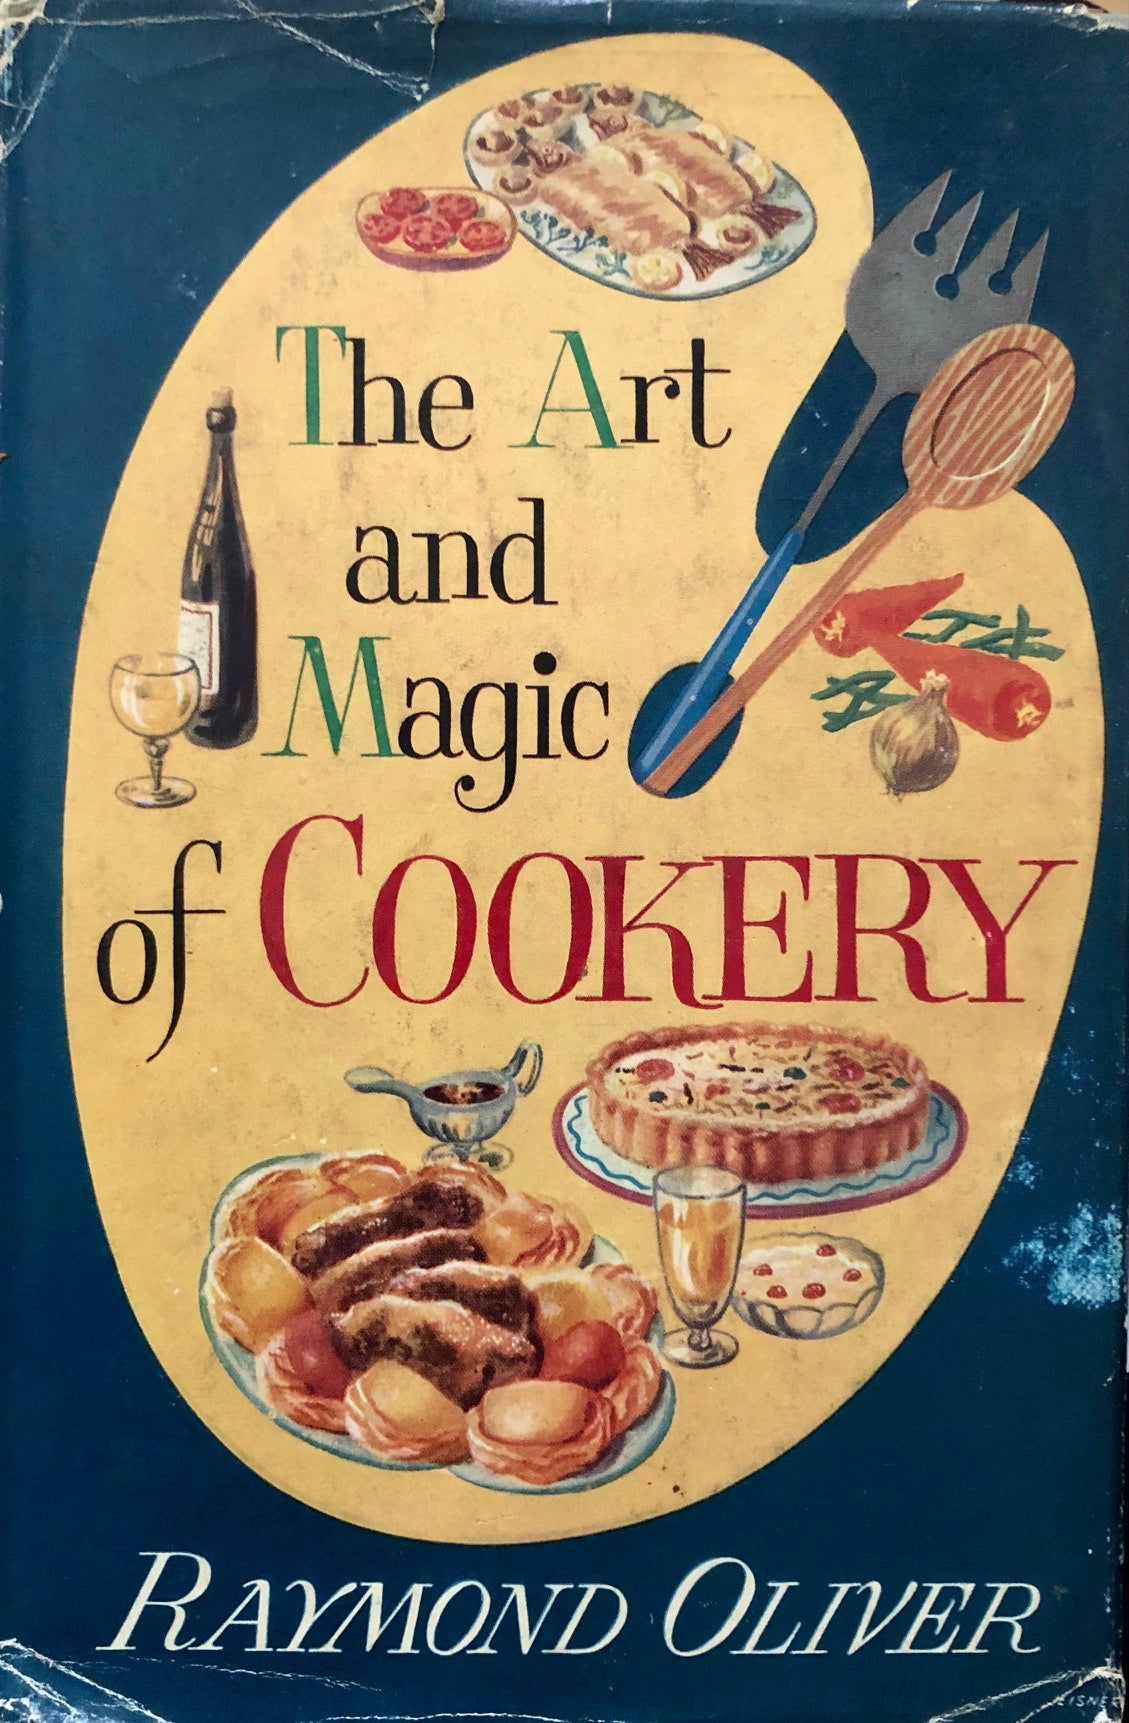 (French) Raymond Oliver. The Art and Magic of Cookery. Translated by Ambrose Heath.